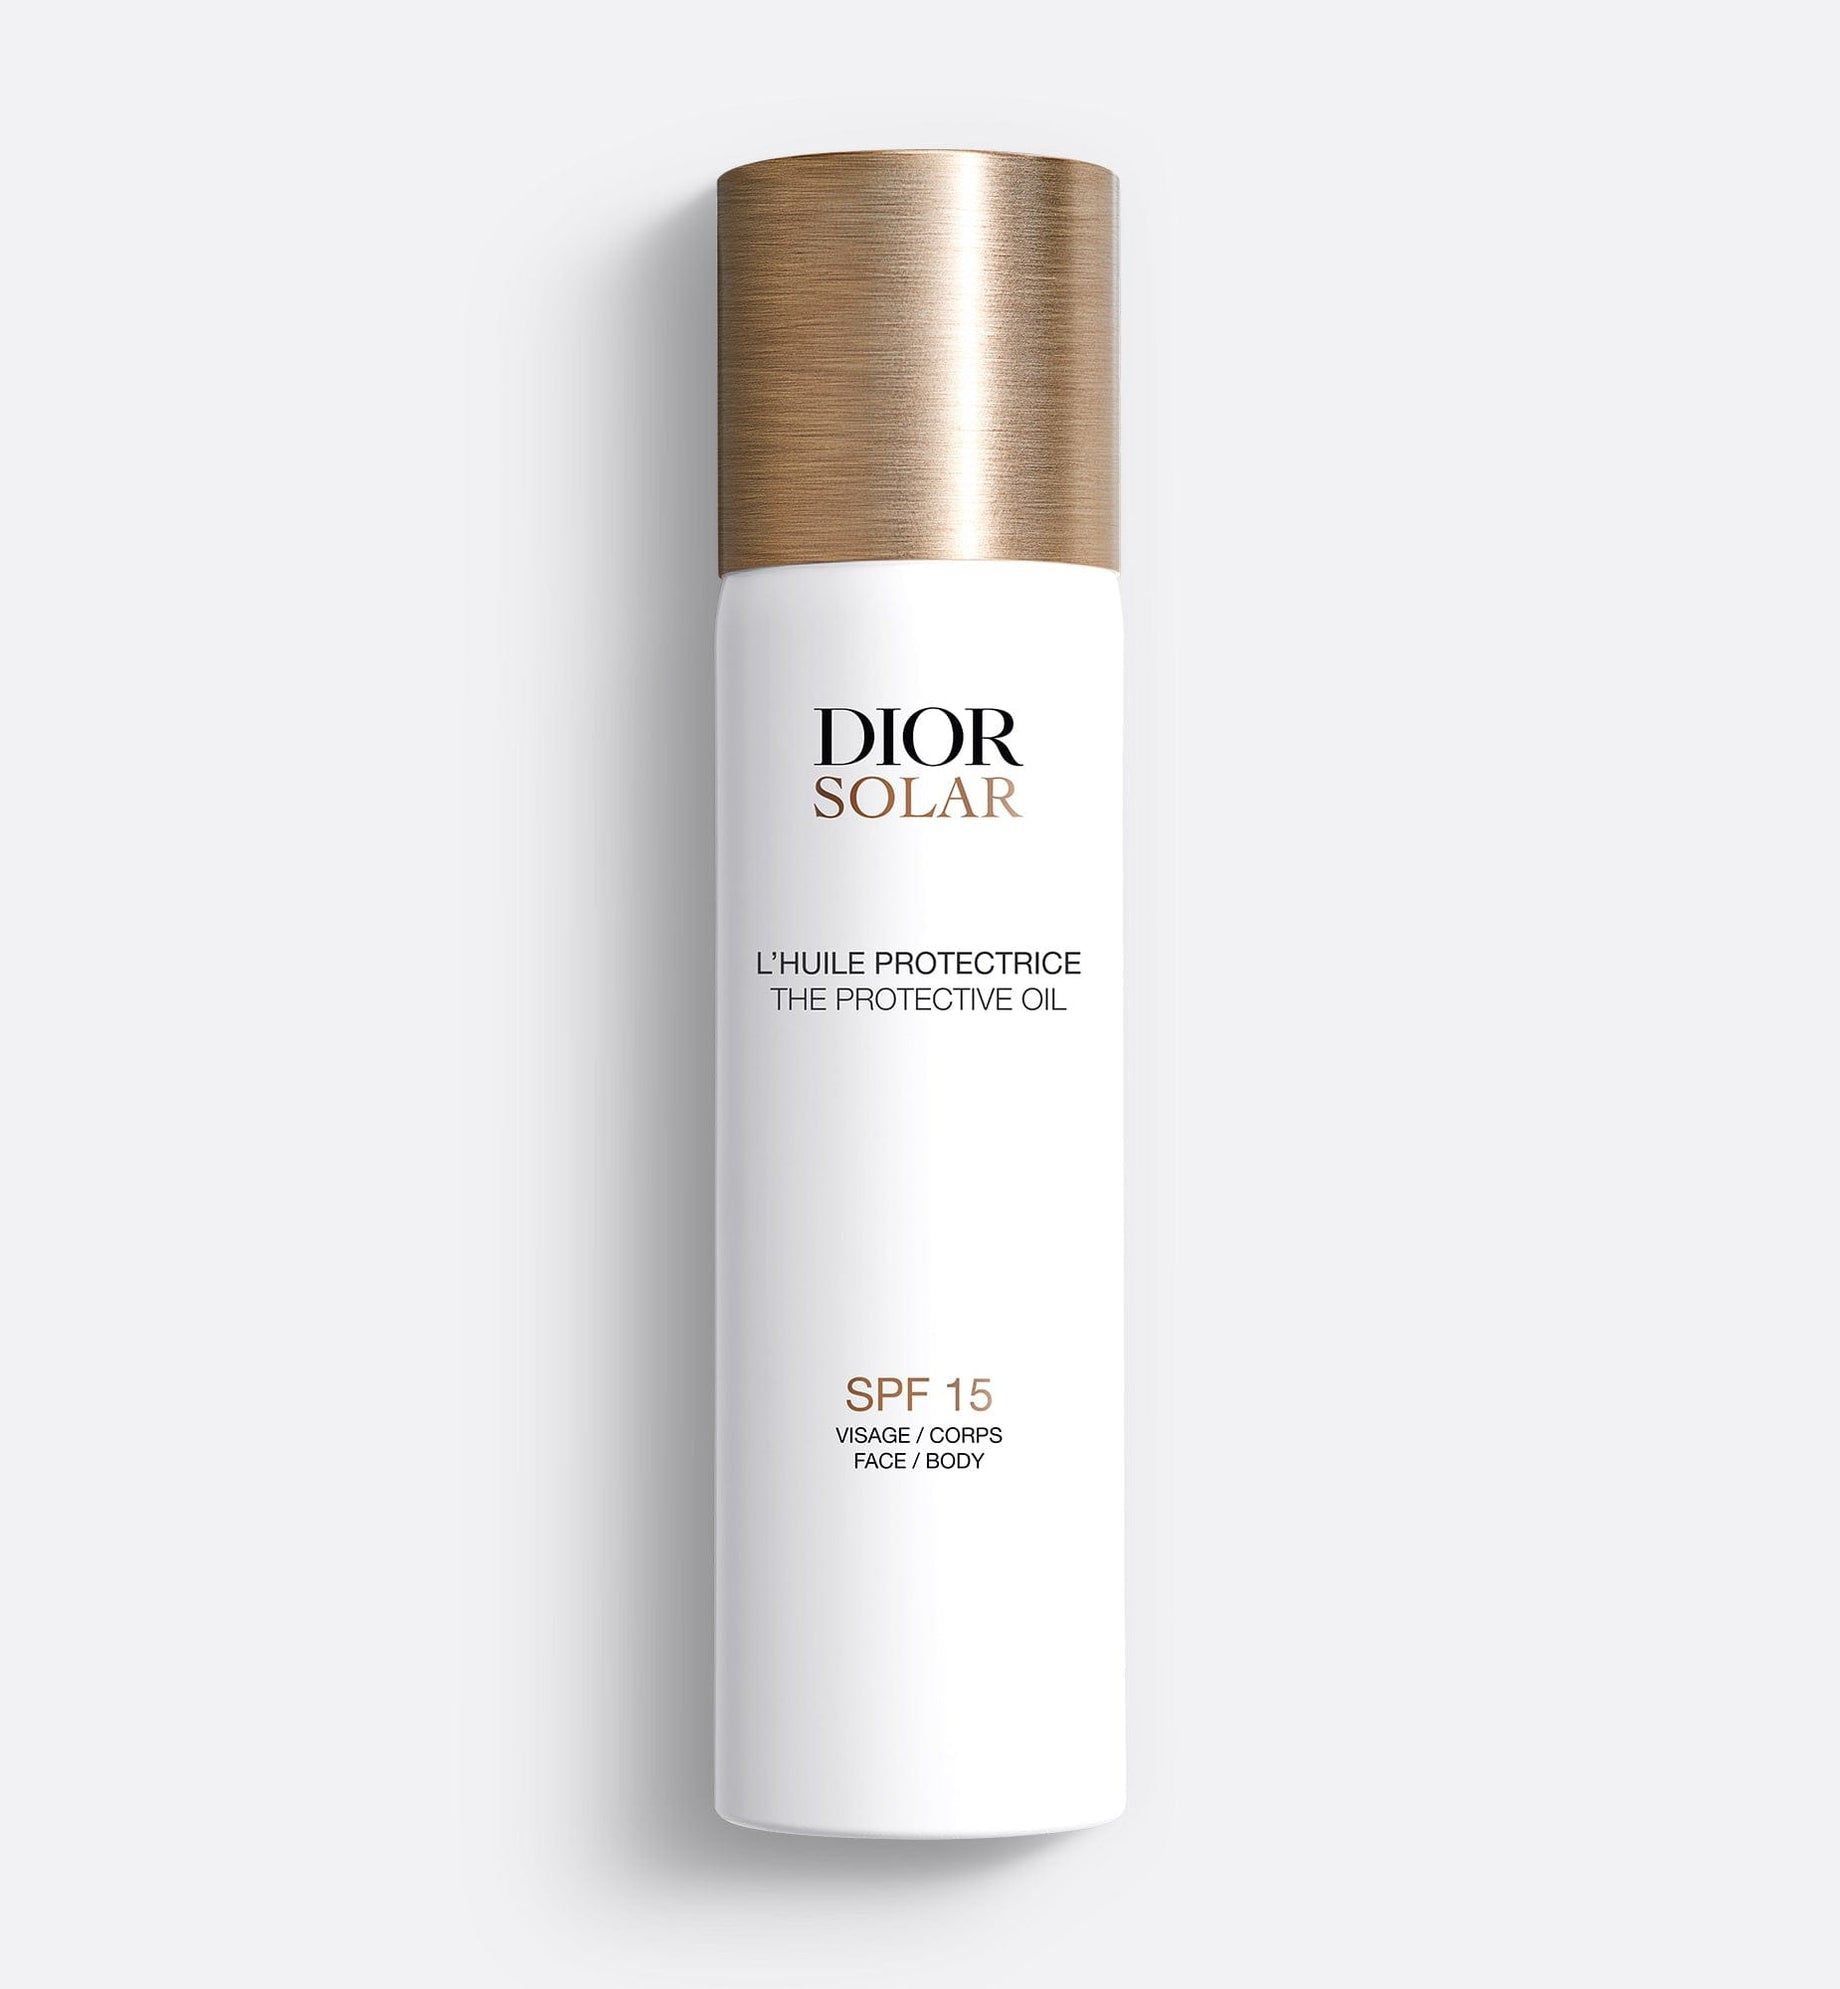 DIOR SOLAR THE PROTECTIVE FACE AND BODY OIL SPF 15